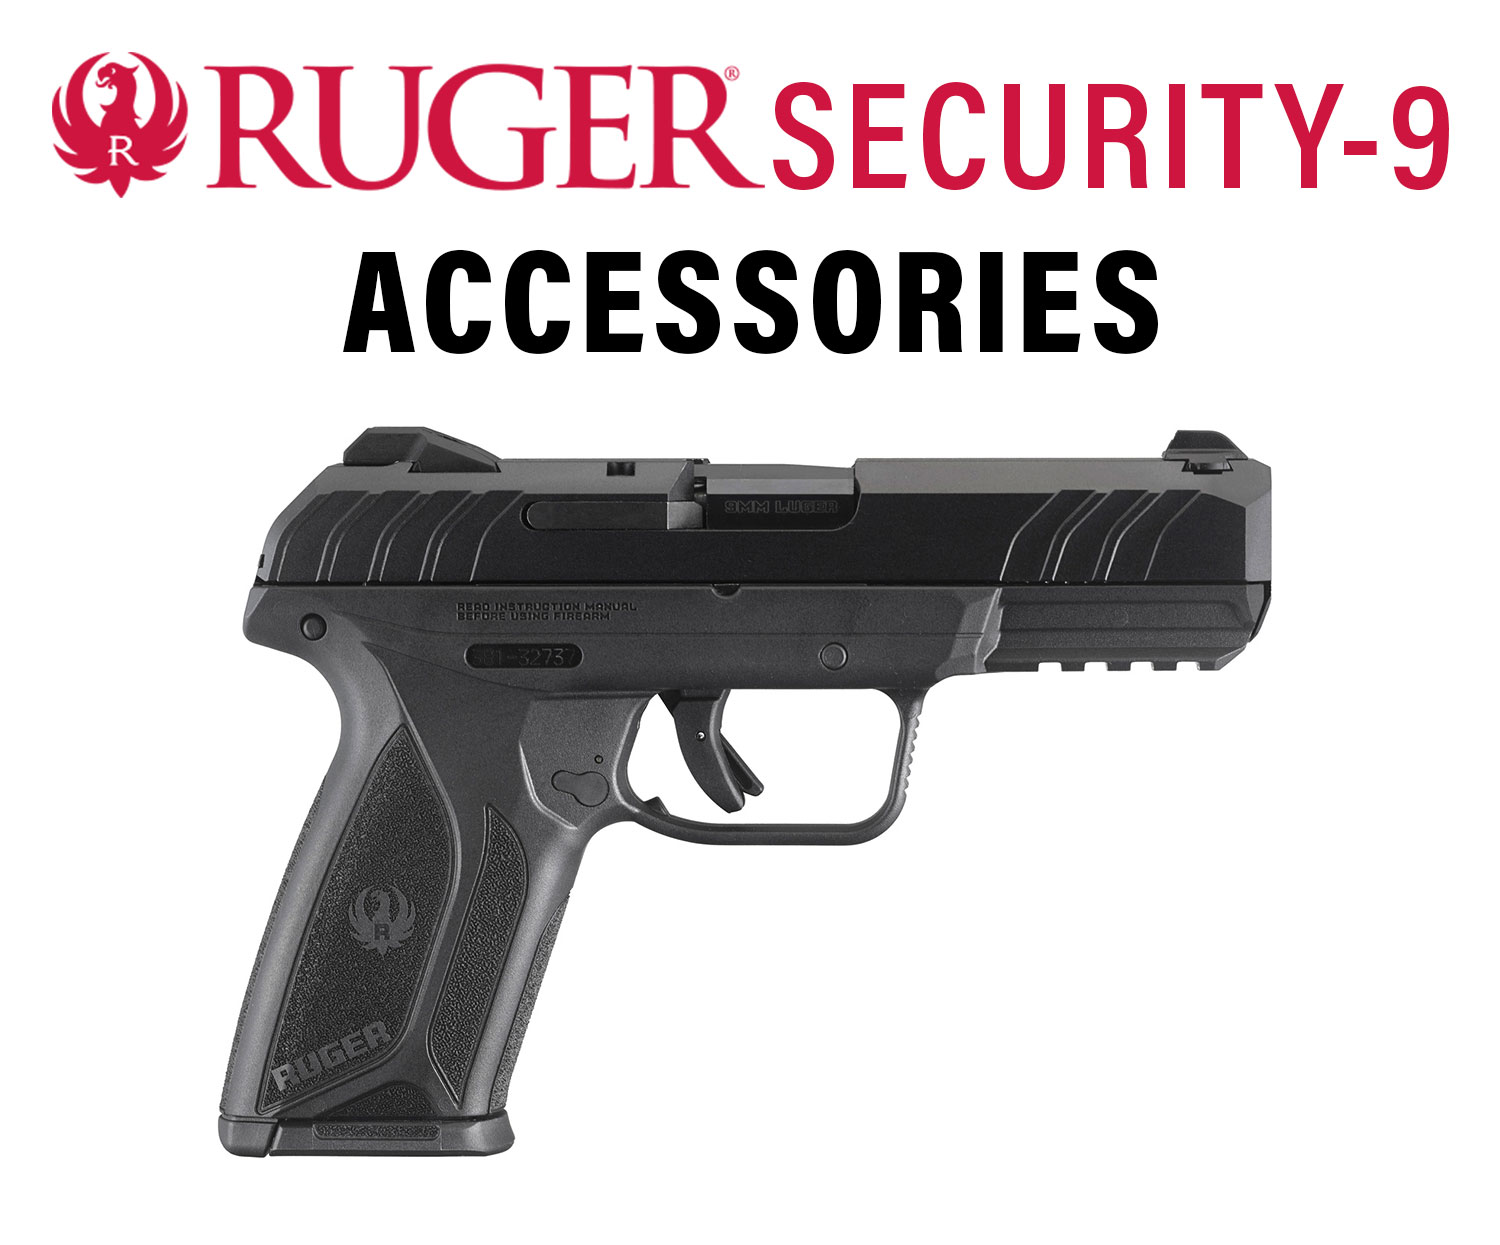 Ruger Security 9 Accessories